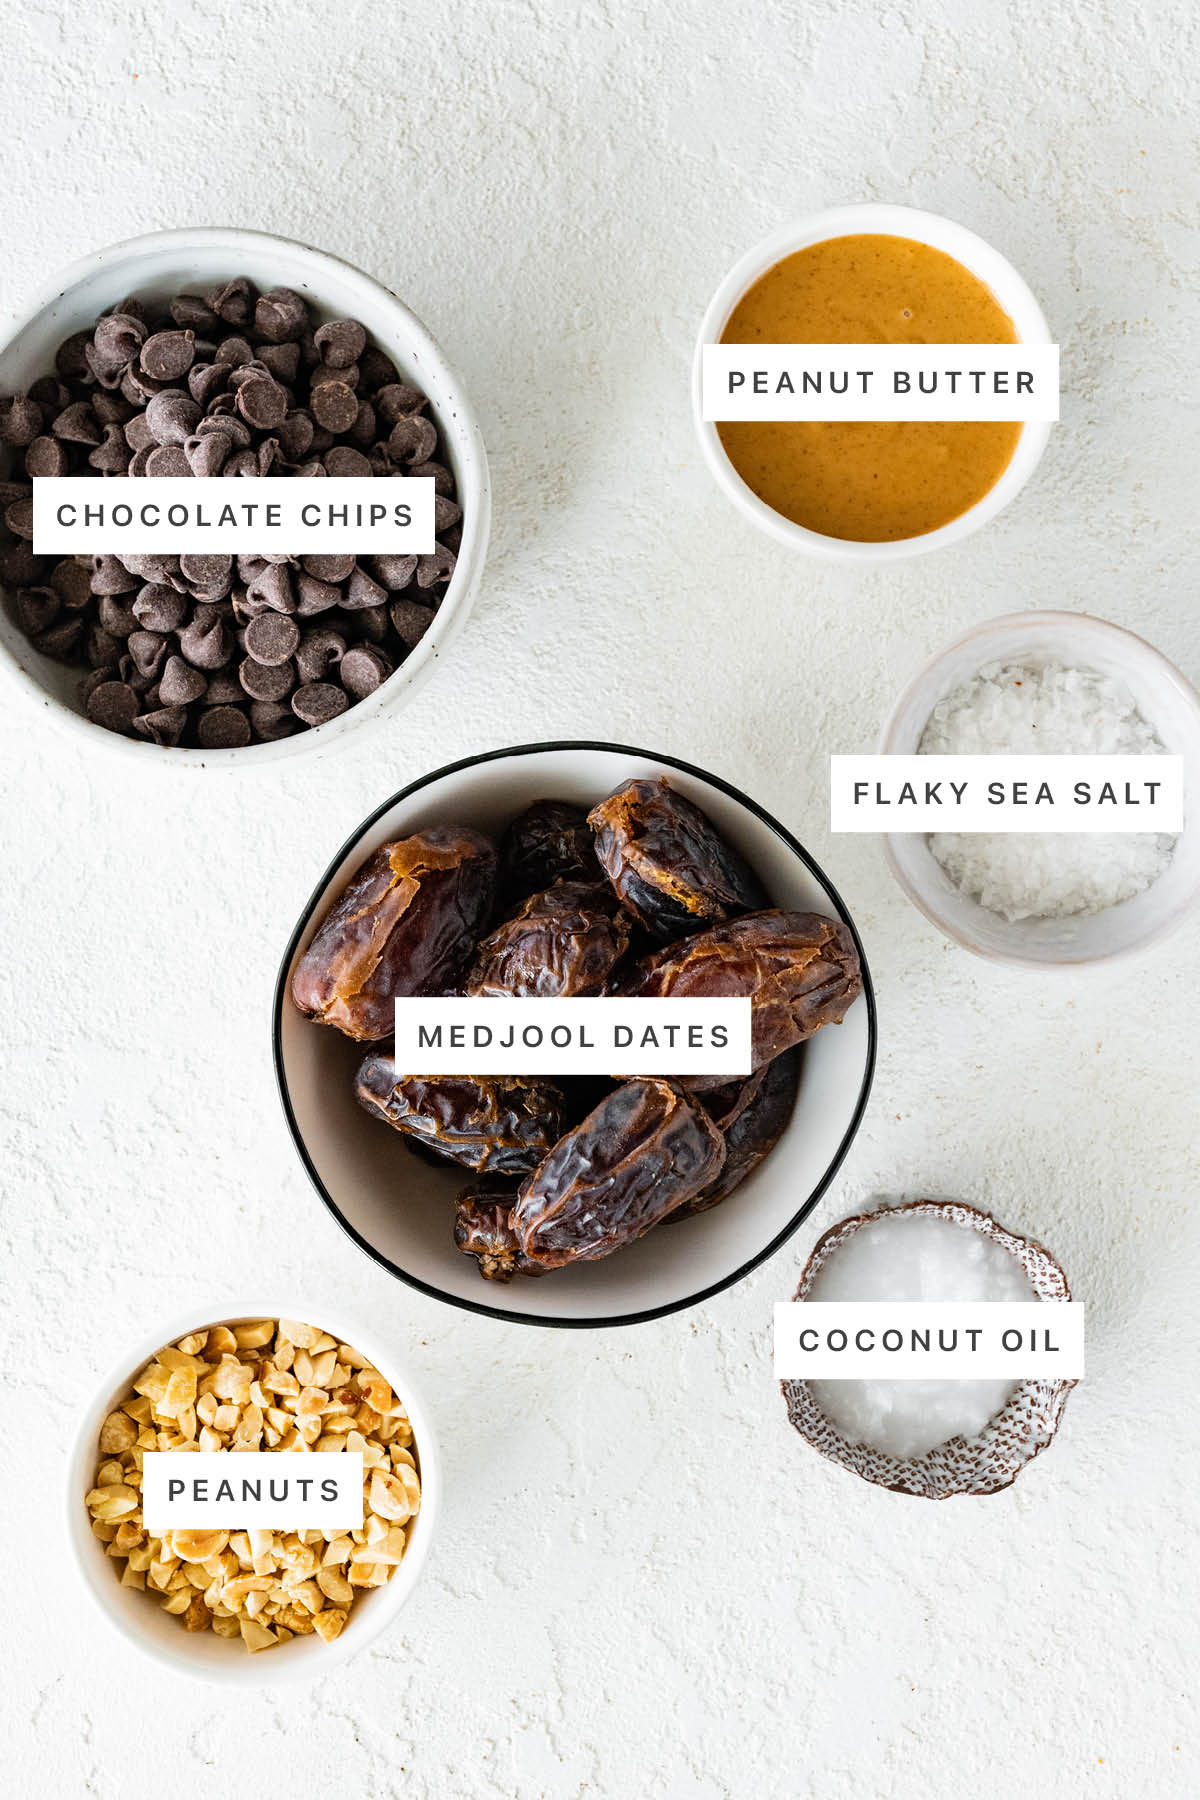 Ingredients measured out to make Date Bark: chocolate chips, peanut butter, flaky sea salt, medjool dates, peanuts and coconut oil.